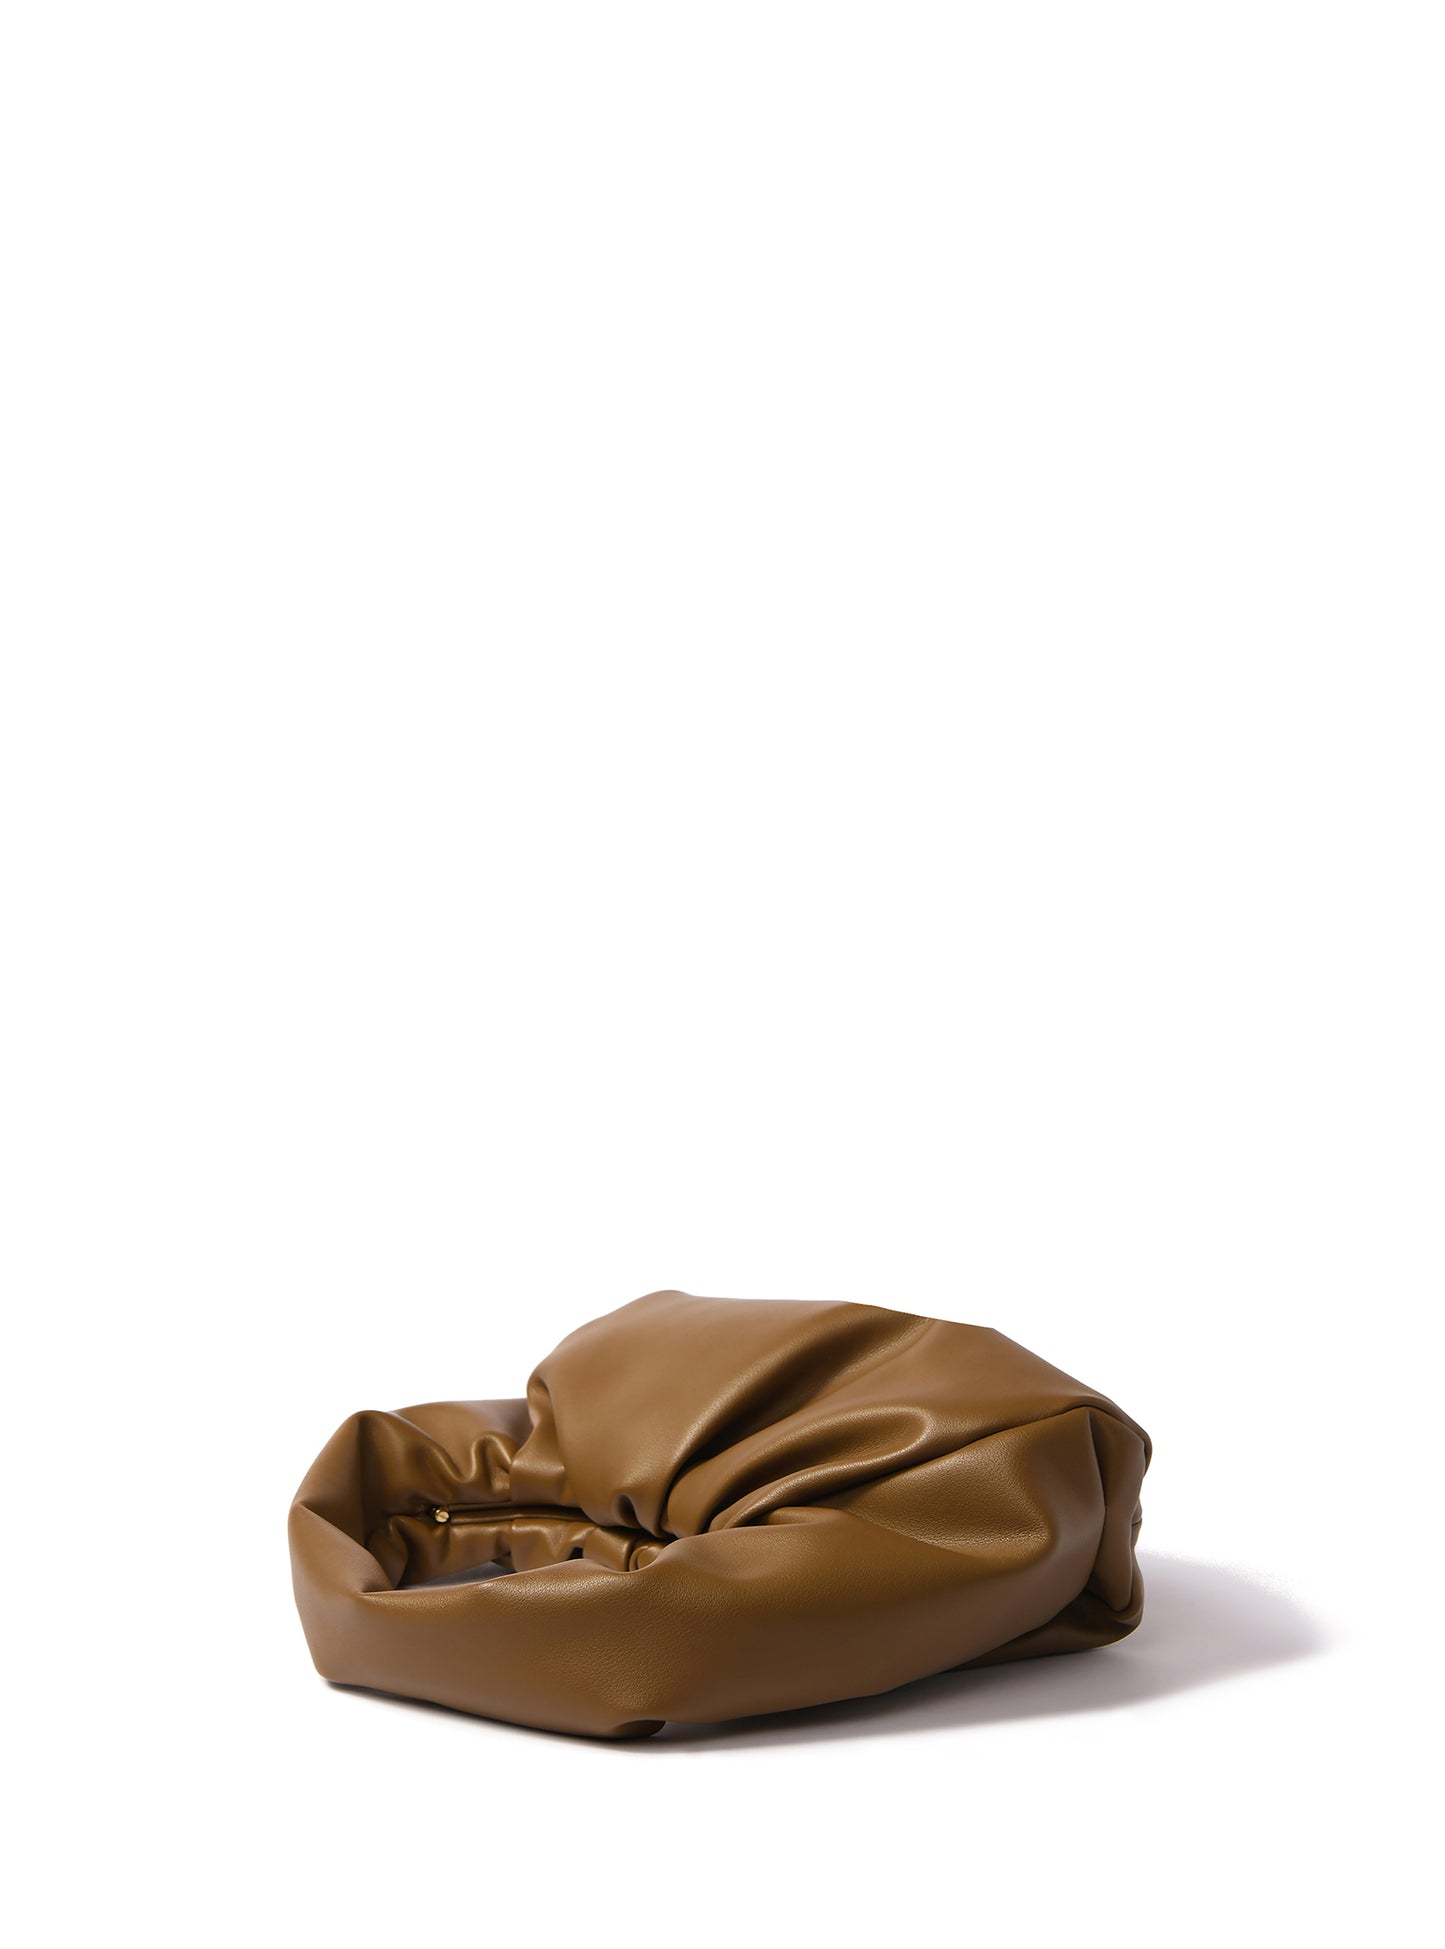 Marshmallow Croissant Bag in Soft Leather, Mustard Green